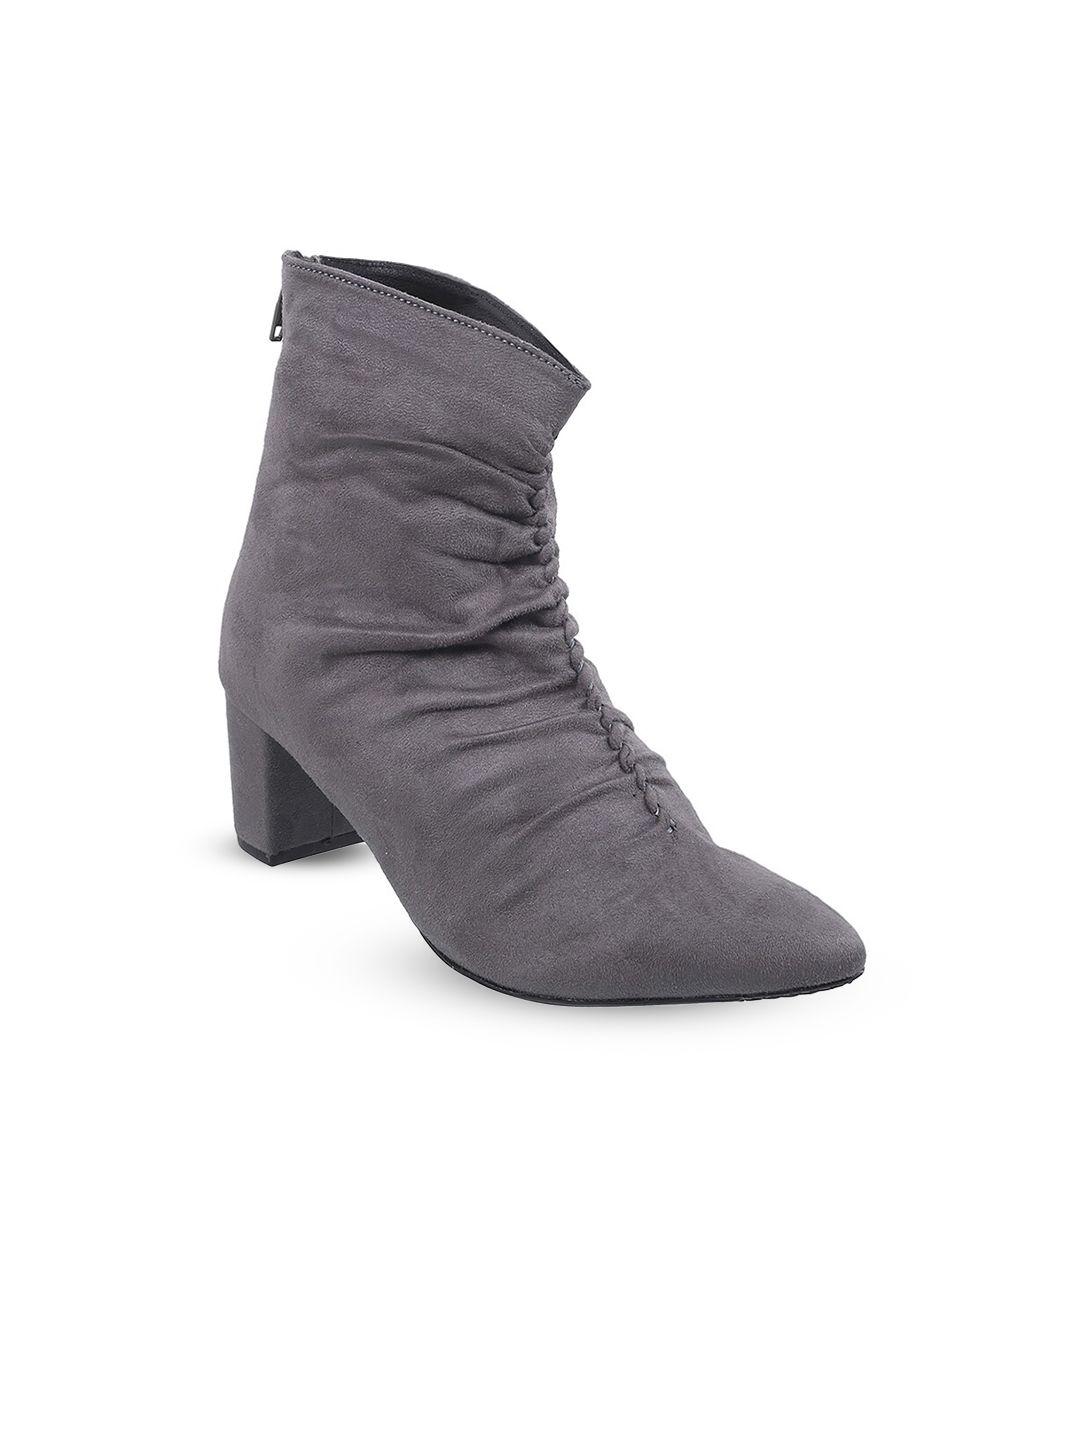 mochi high-top blocked heel pointed toe boots